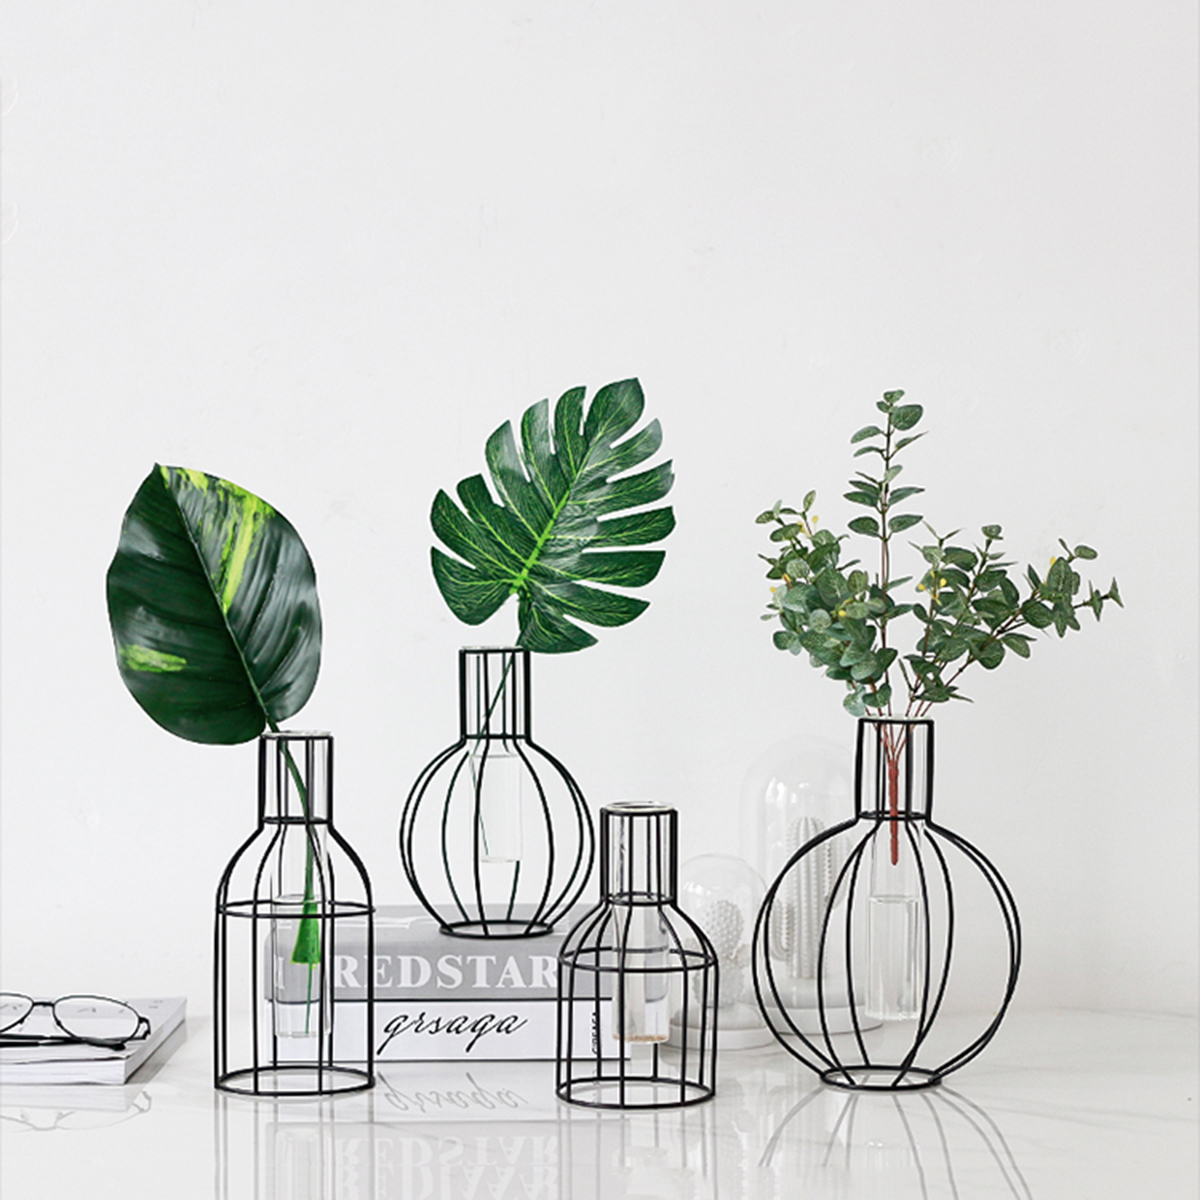 3D-Nordic-Metal-Vase-Glass-Tube-Hydroponic-Plant-Container-Ornaments-Home-Decor-1604666-2